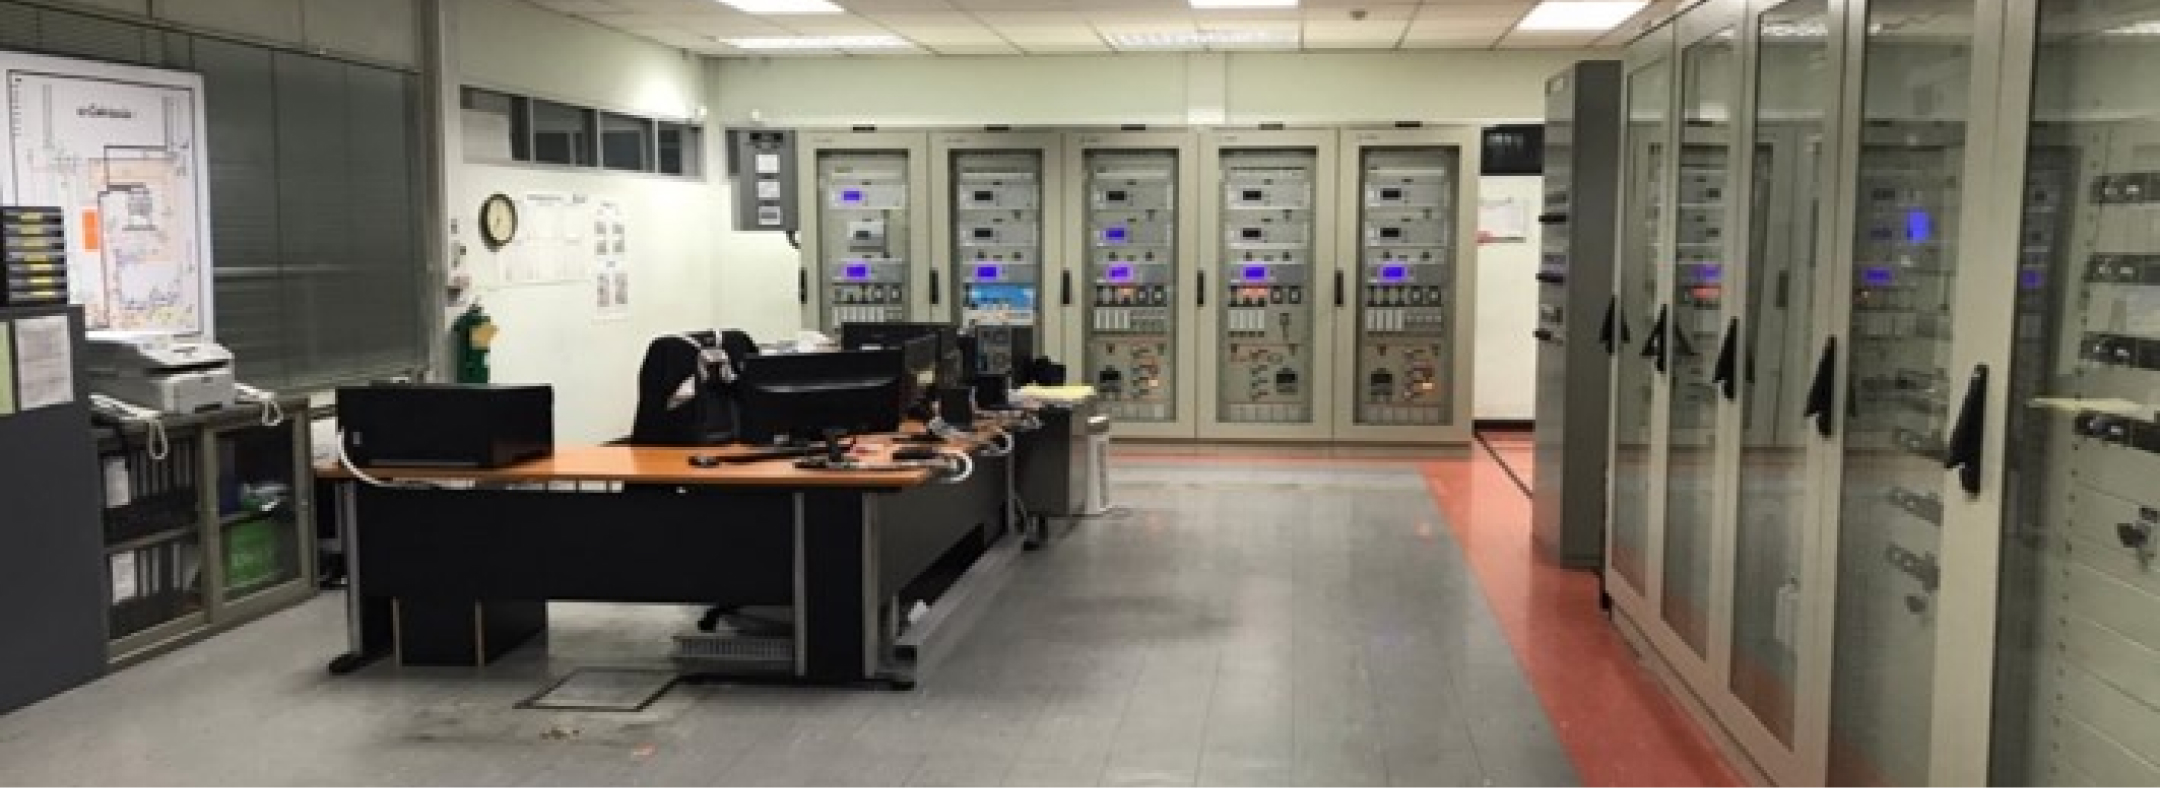 Improving the efficiency of power station control and protection systems Project